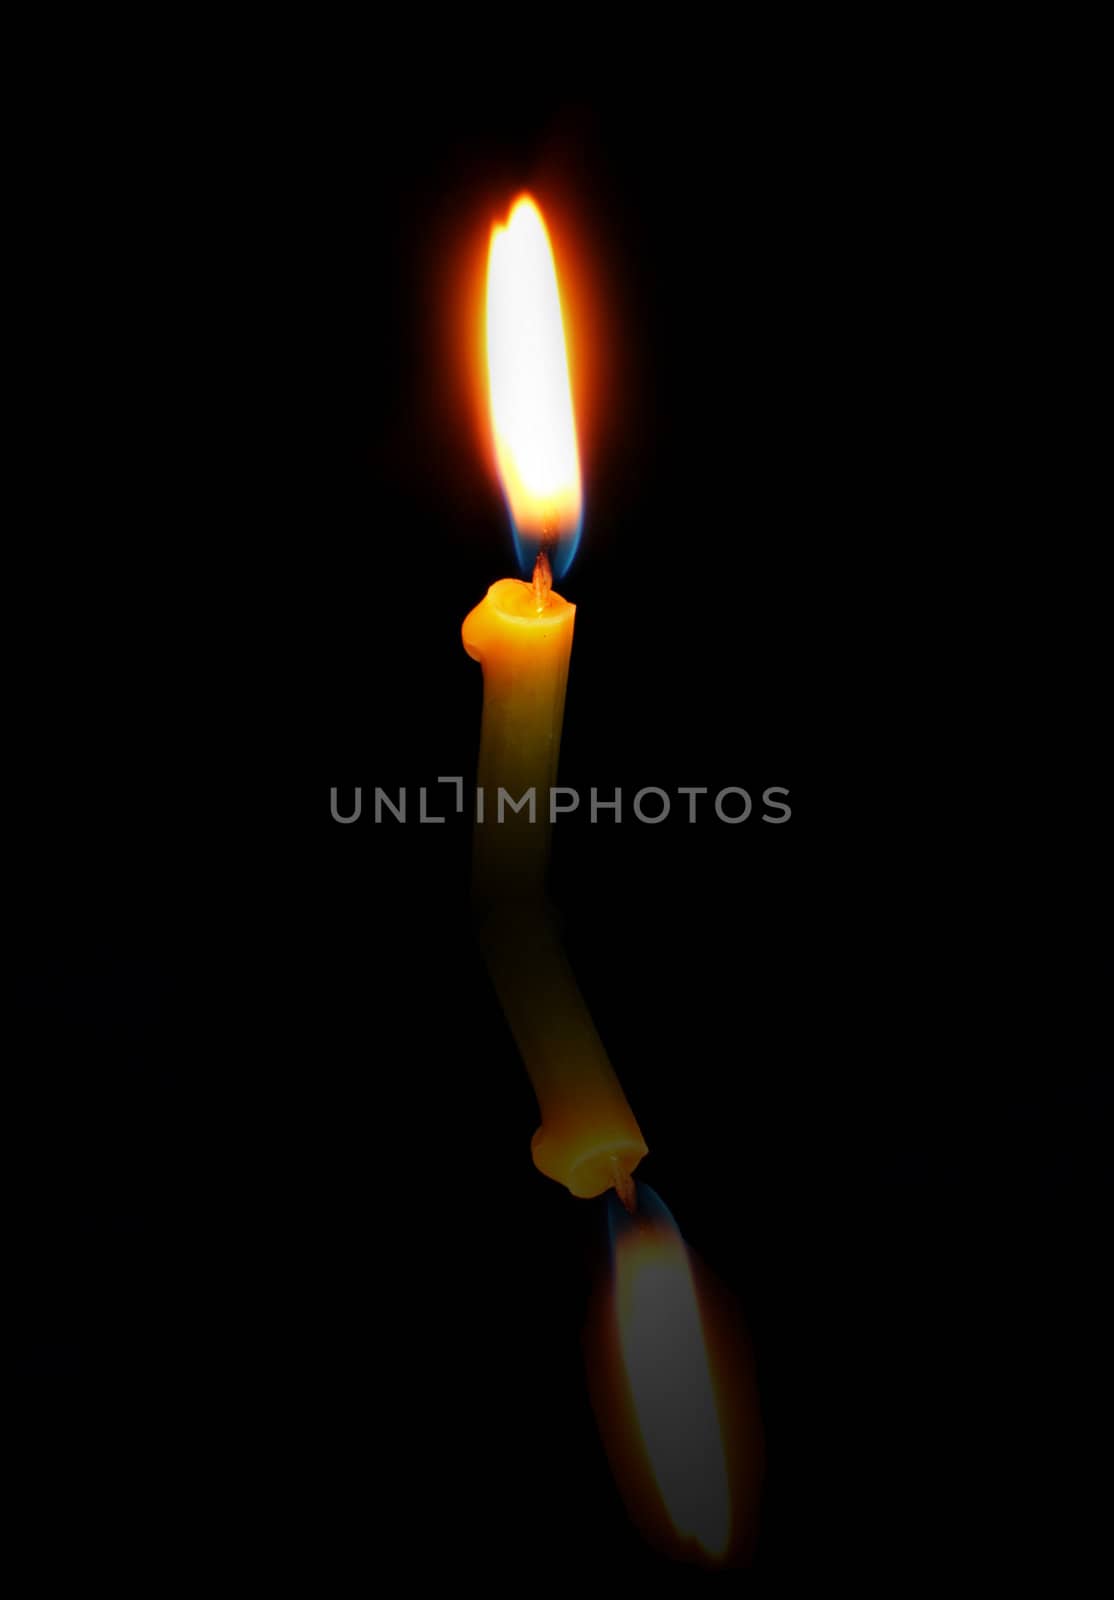 Church Candle with a reflection on a black background